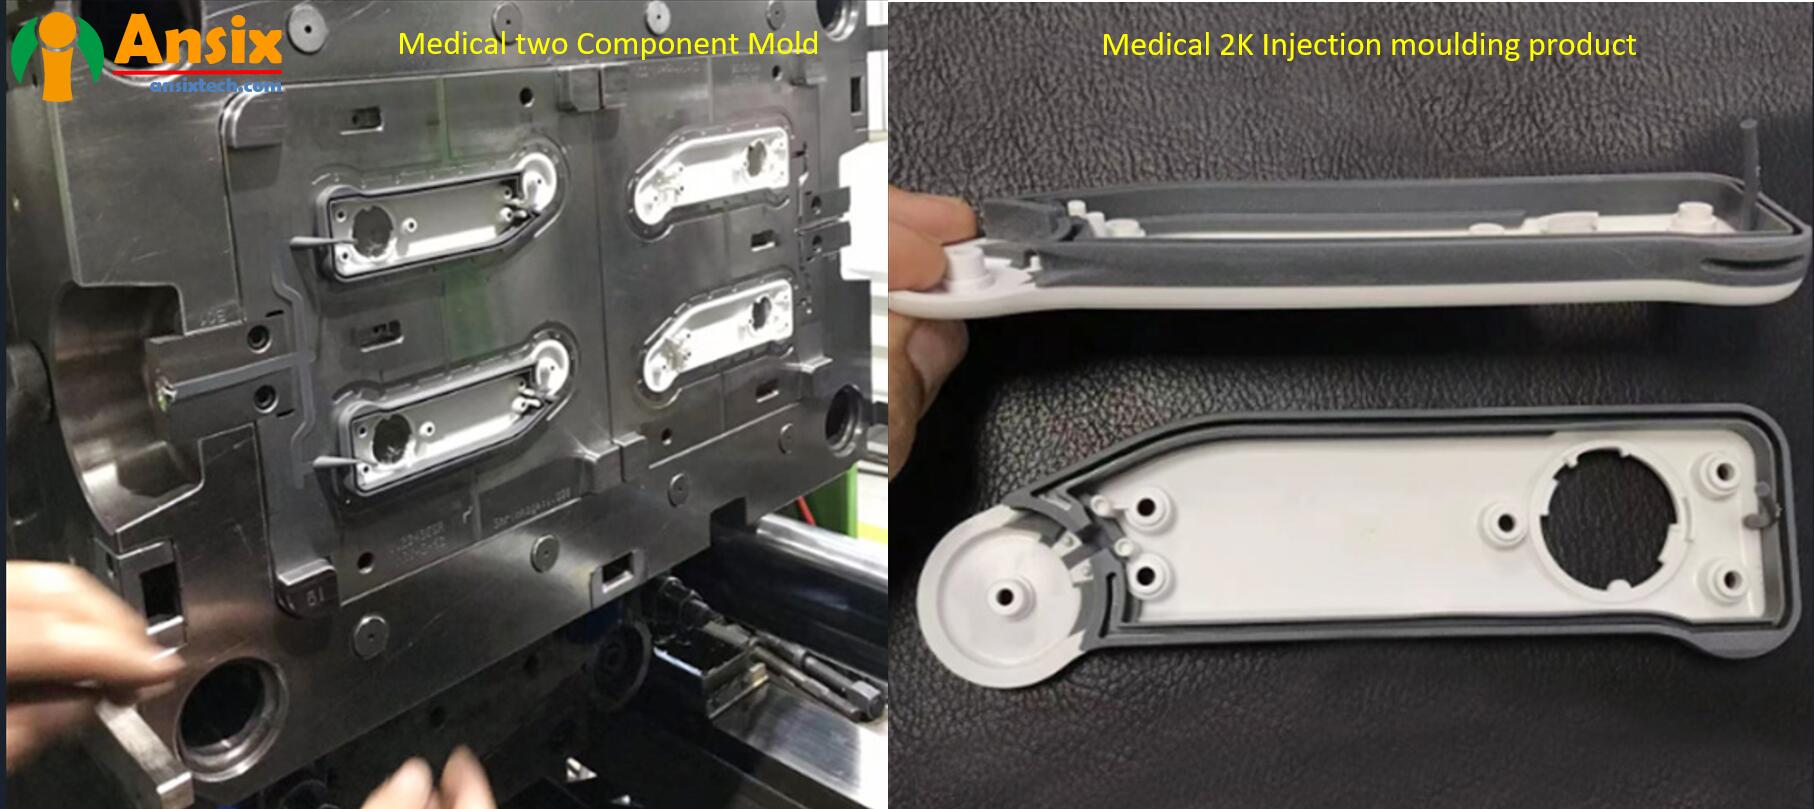 Medical two Component and 2K Injection molding6k7f